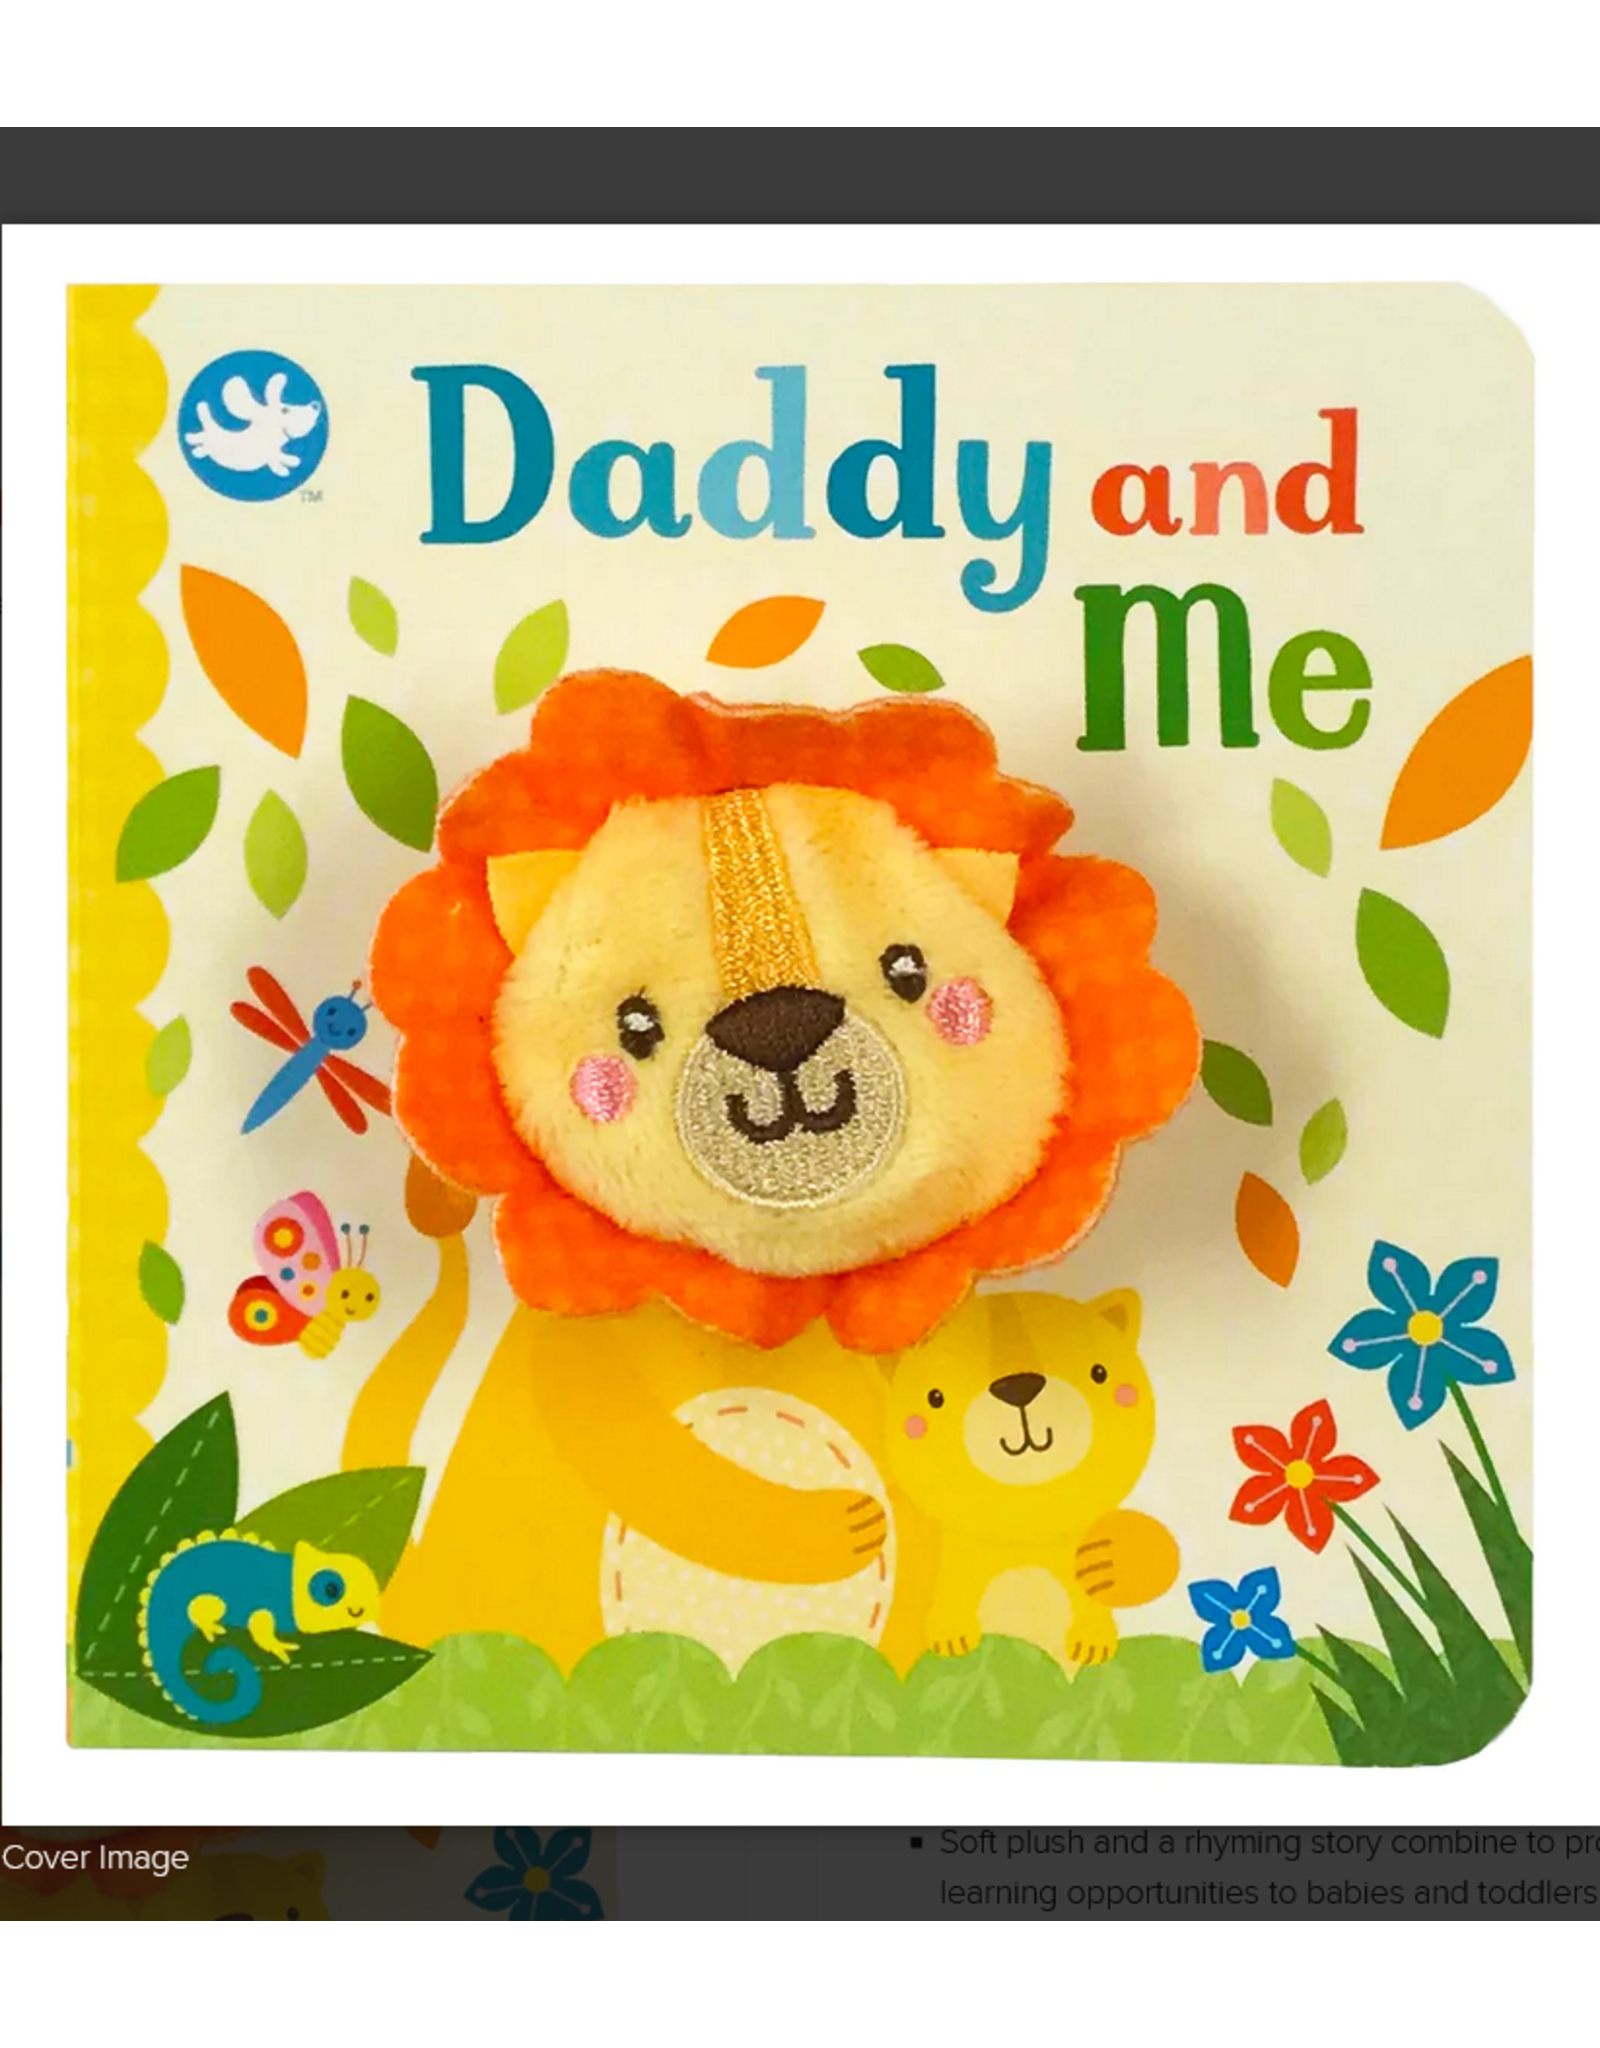 Cottage Door Press Daddy and Me Finger Puppet Book